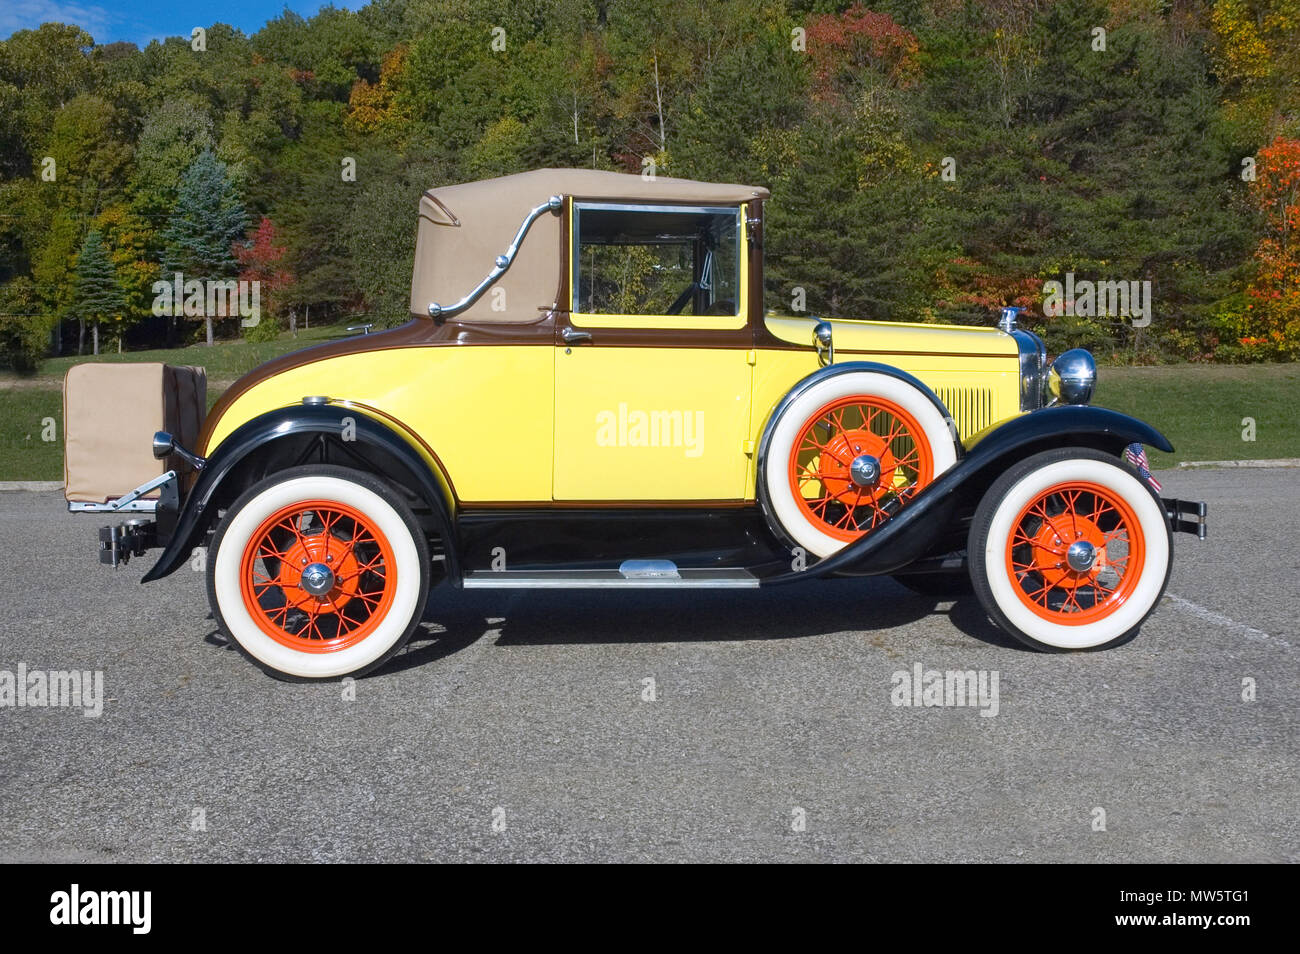 Antique 1931 Ford Model 'A' with an unusual but authentic paint scheme.  The colors of the car match the fall pallet of the trees in the background. Stock Photo